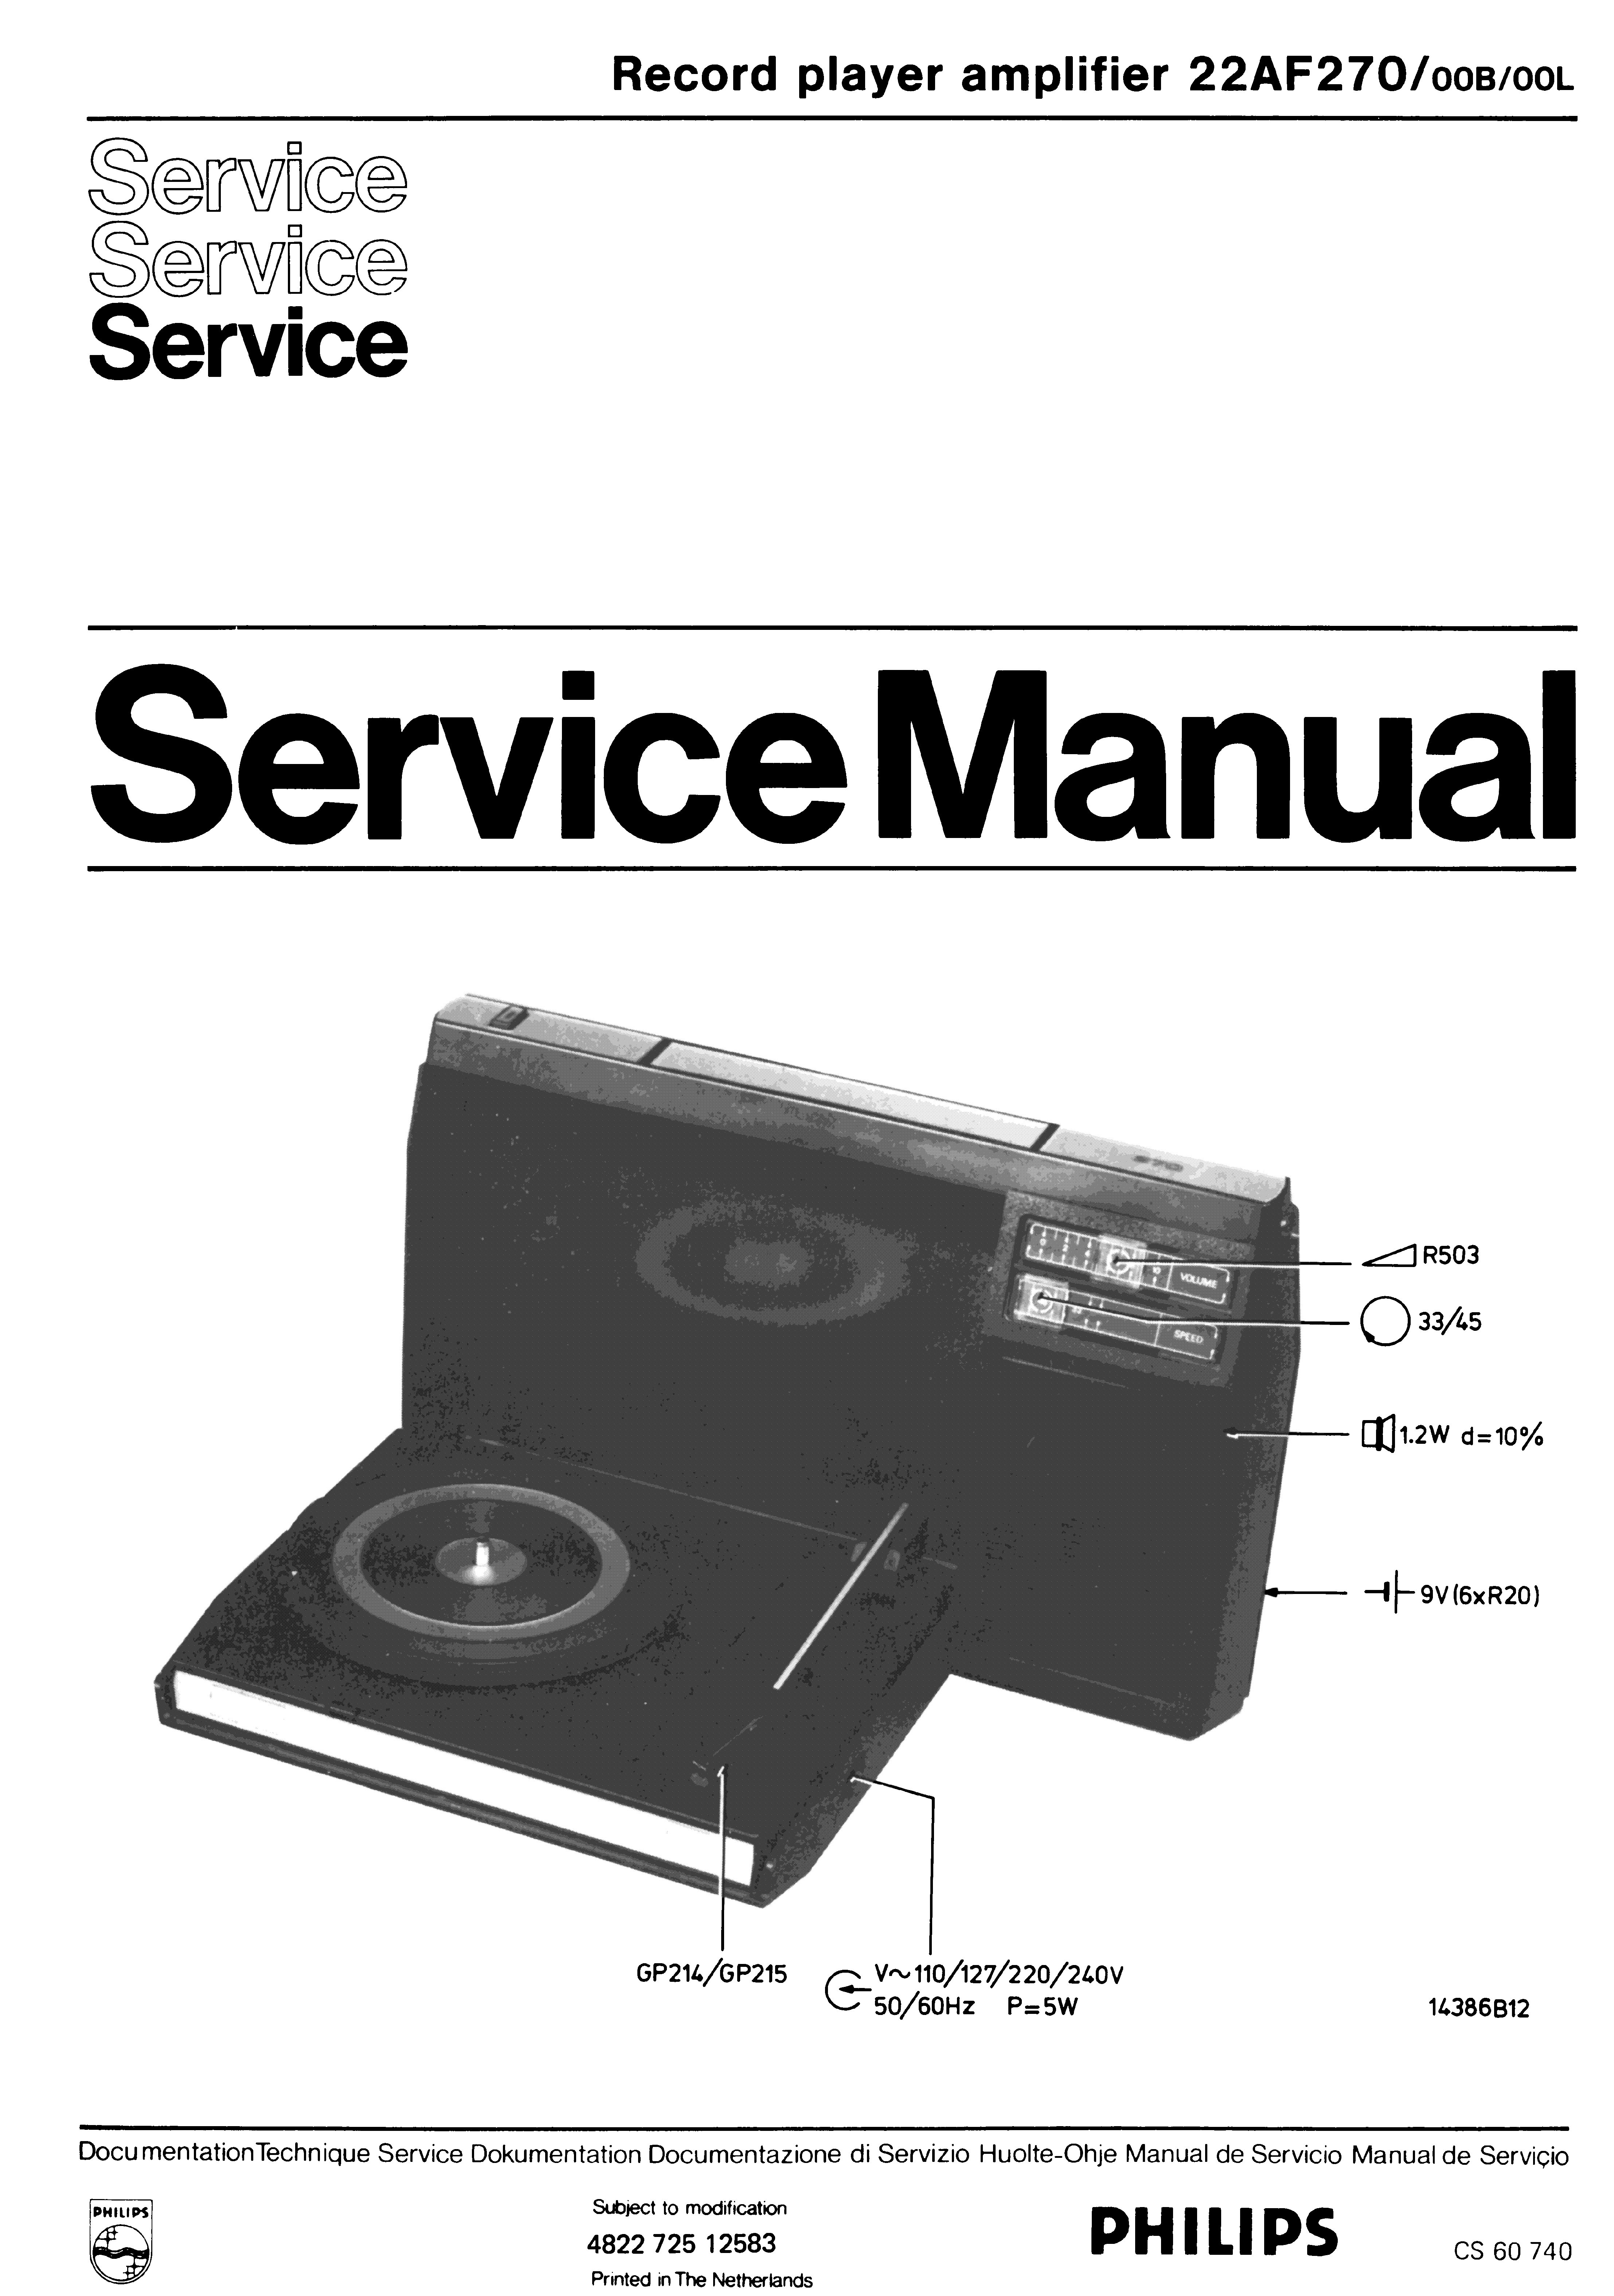 PHILIPS 22AF270 RECORD PLAYER AMPLIFIER SM service manual (1st page)